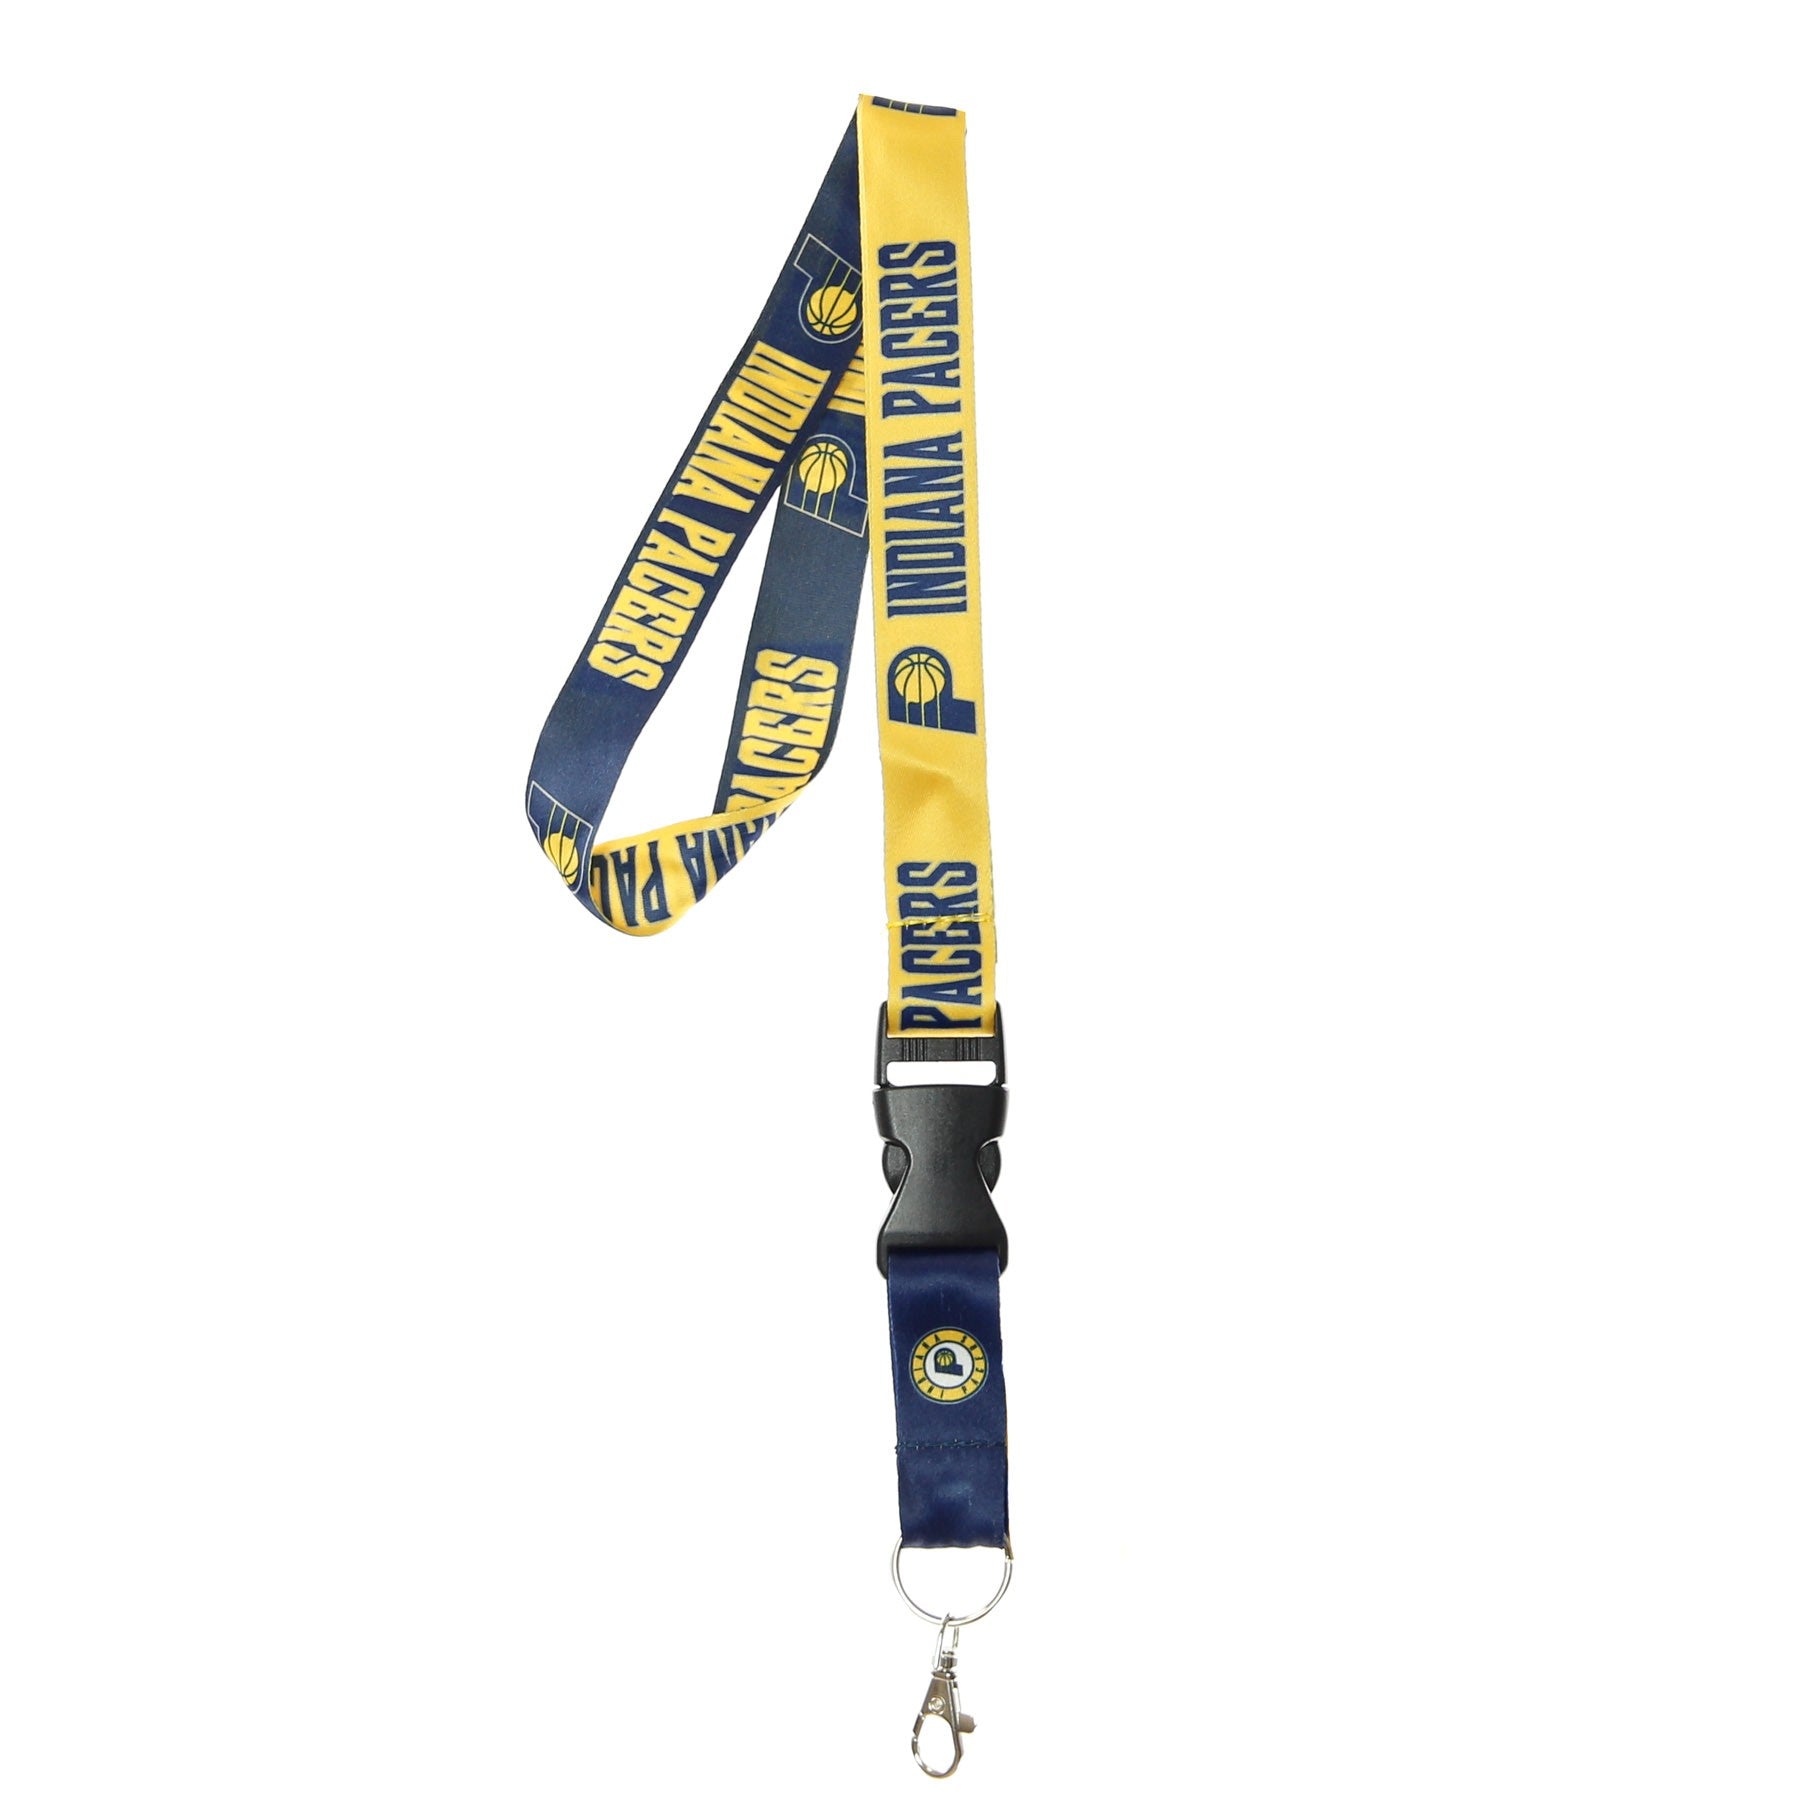 Unisex Nba Lanyard Keychain With Buckle Indpac Original Team Colors